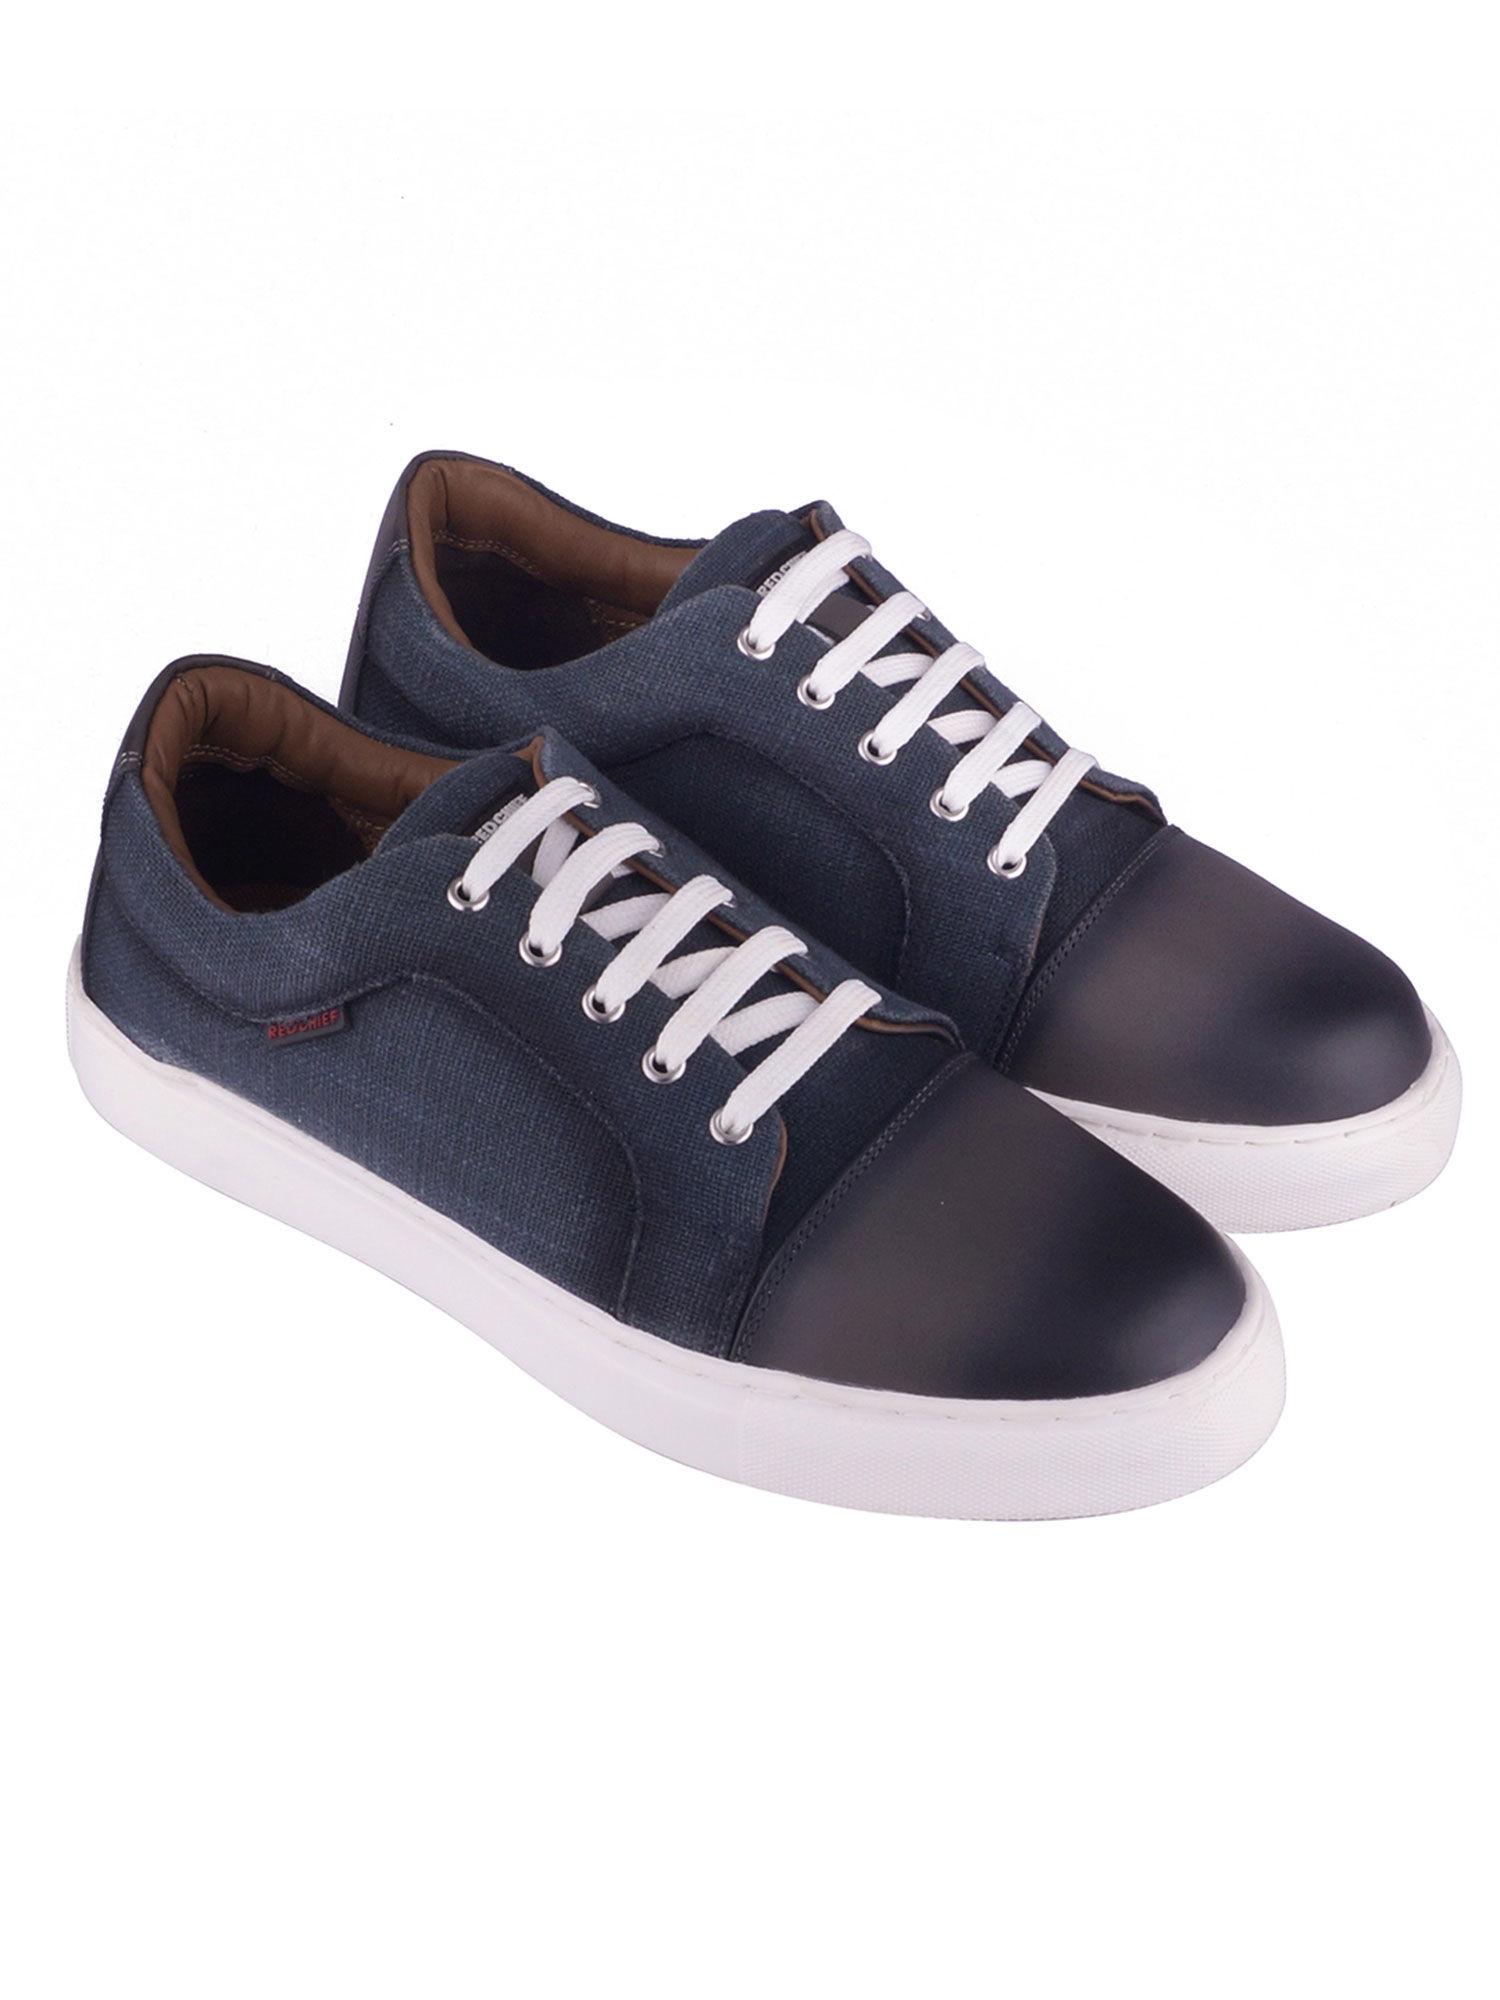 grey sneakers leather casual shoes